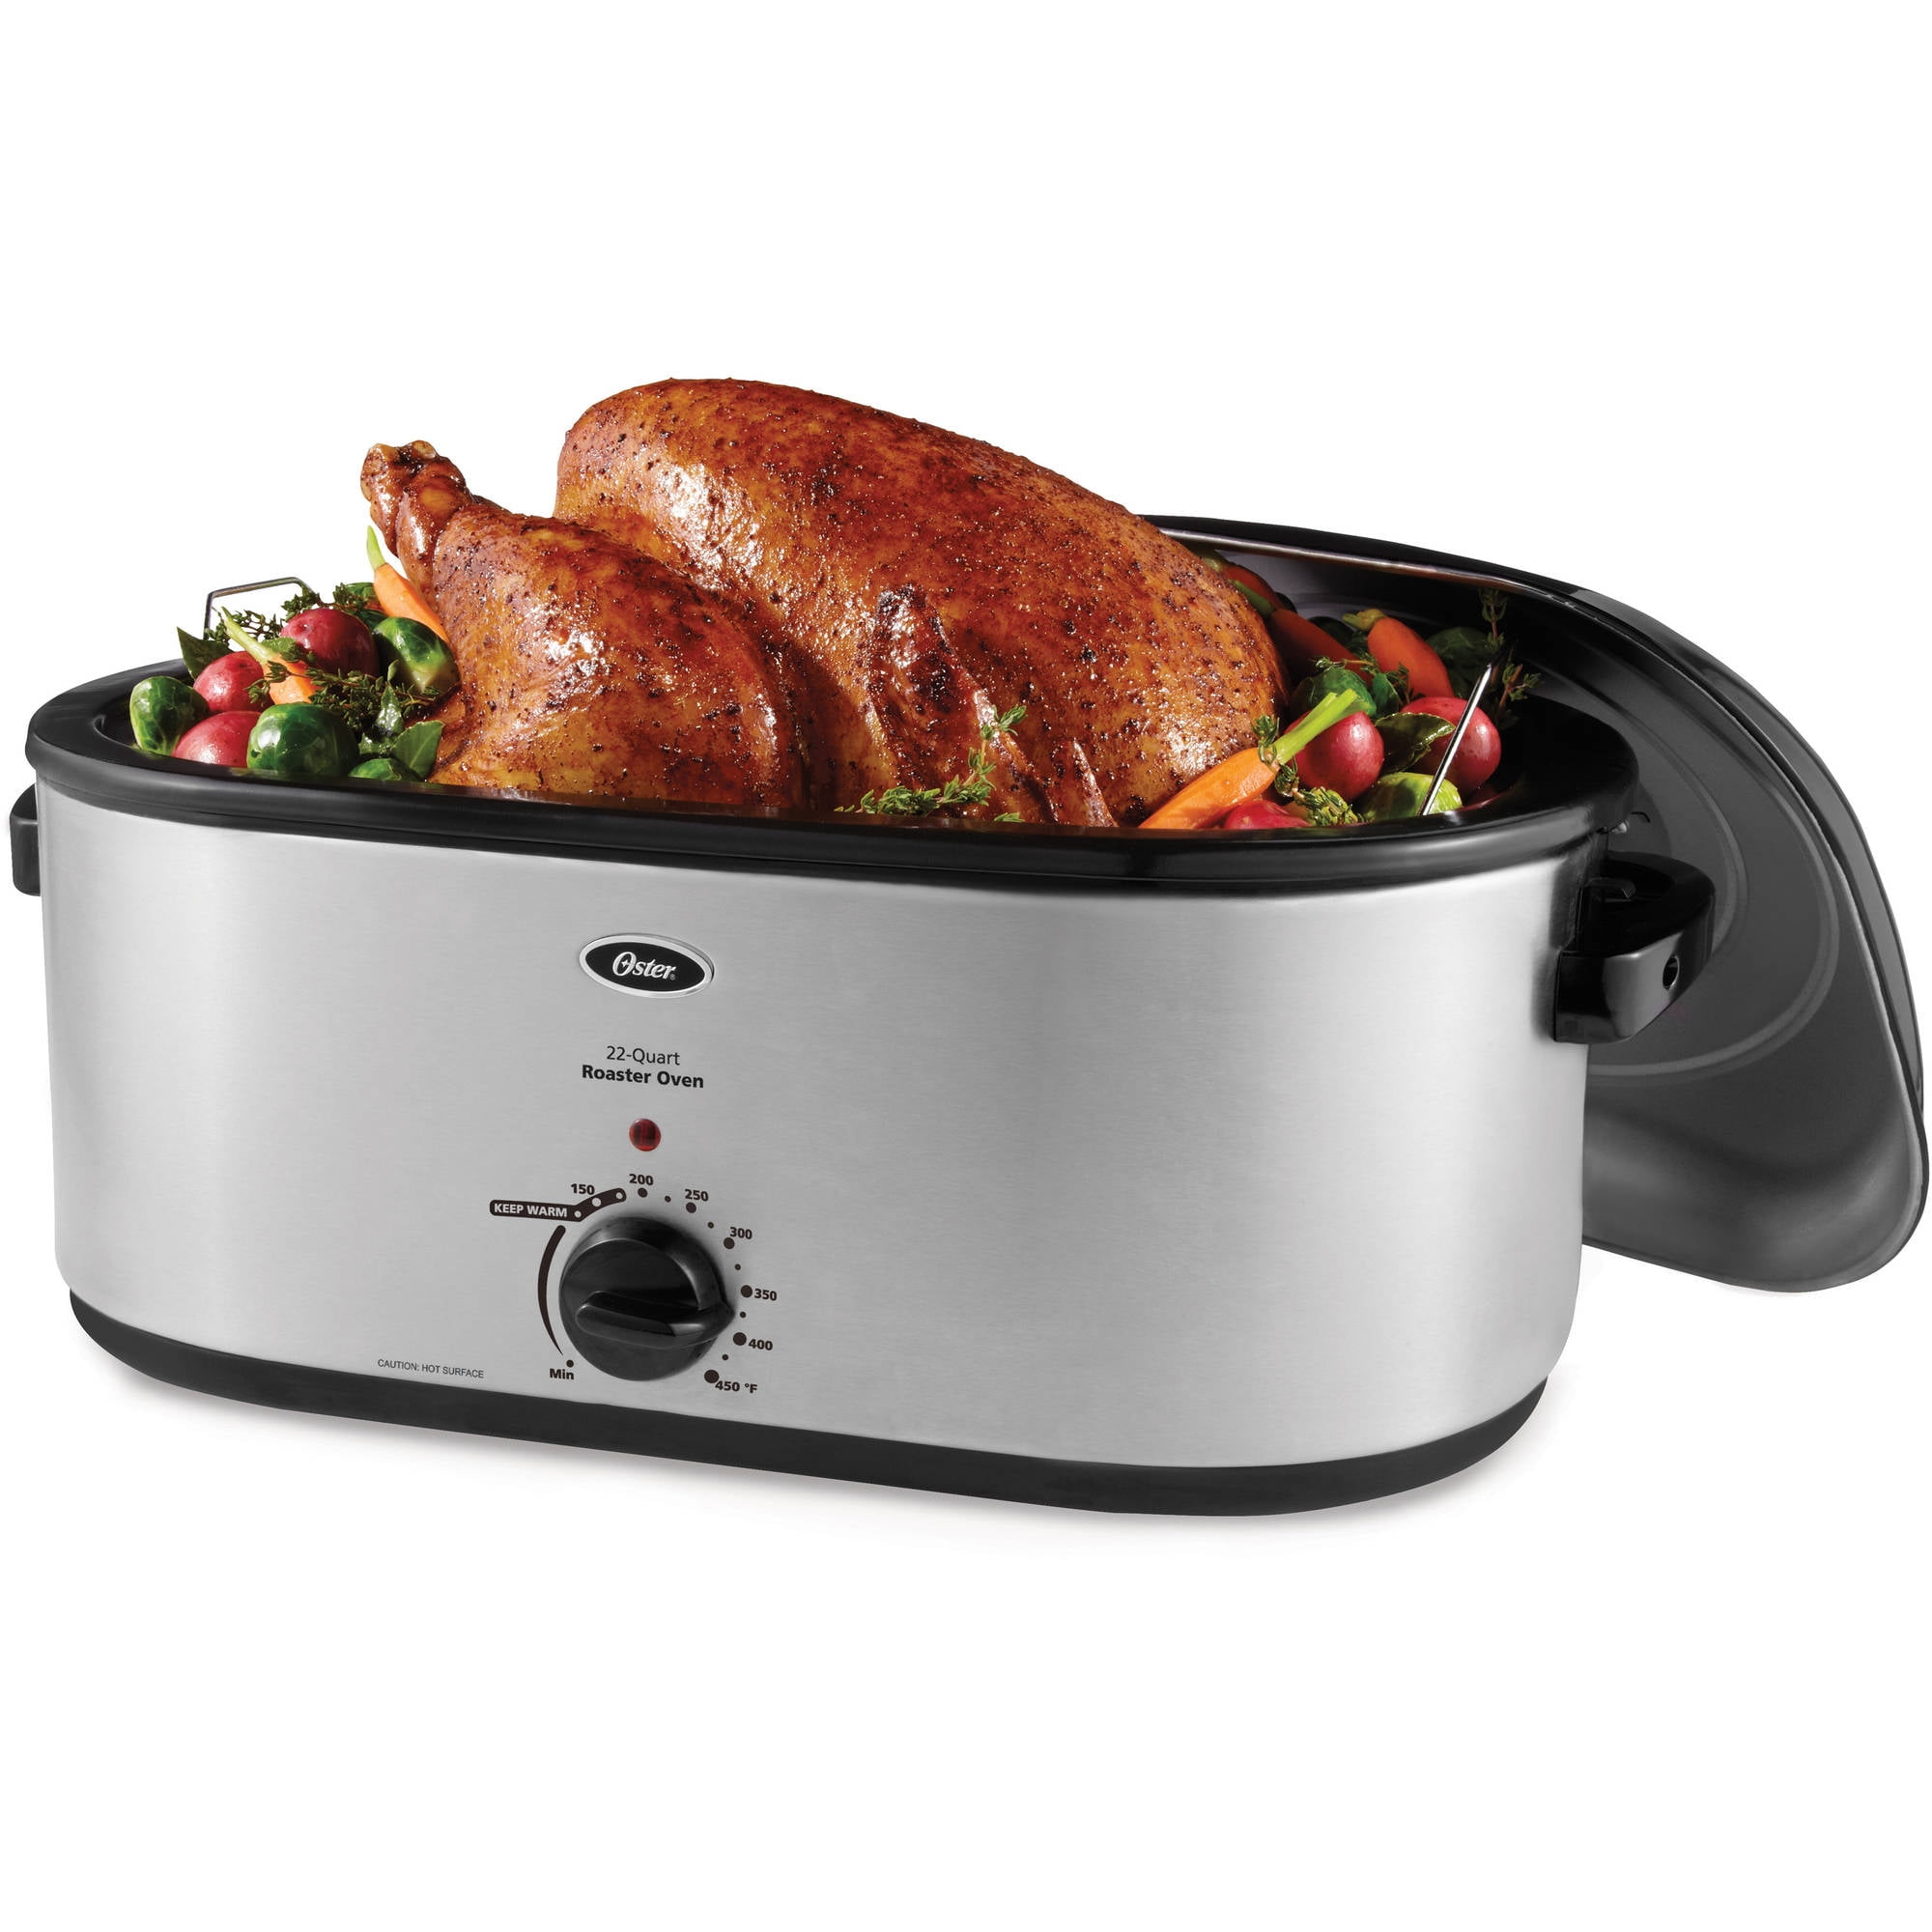 Stainless Steel Oster 22-Quart Roaster Oven with Self-Basting Lid 